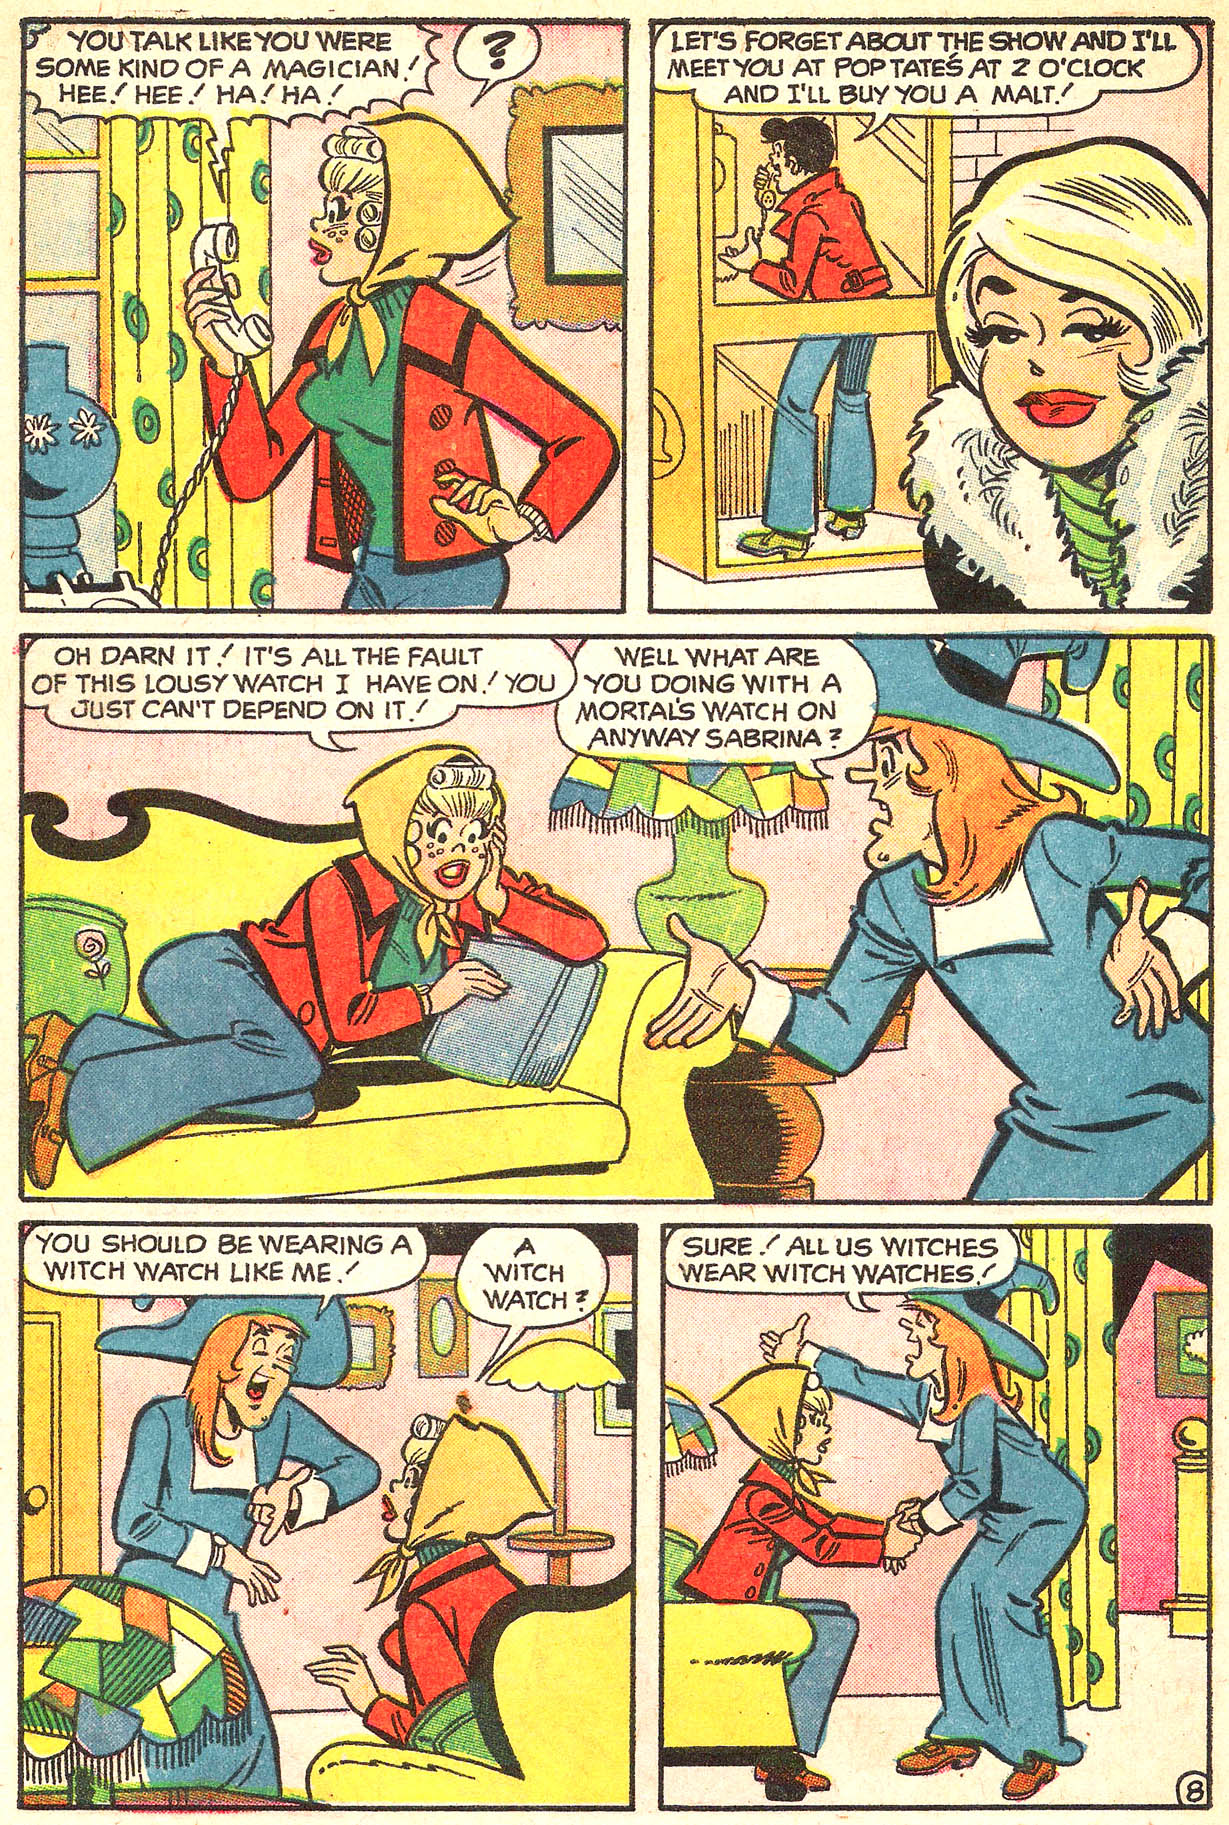 Sabrina The Teenage Witch (1971) Issue #6 #6 - English 22